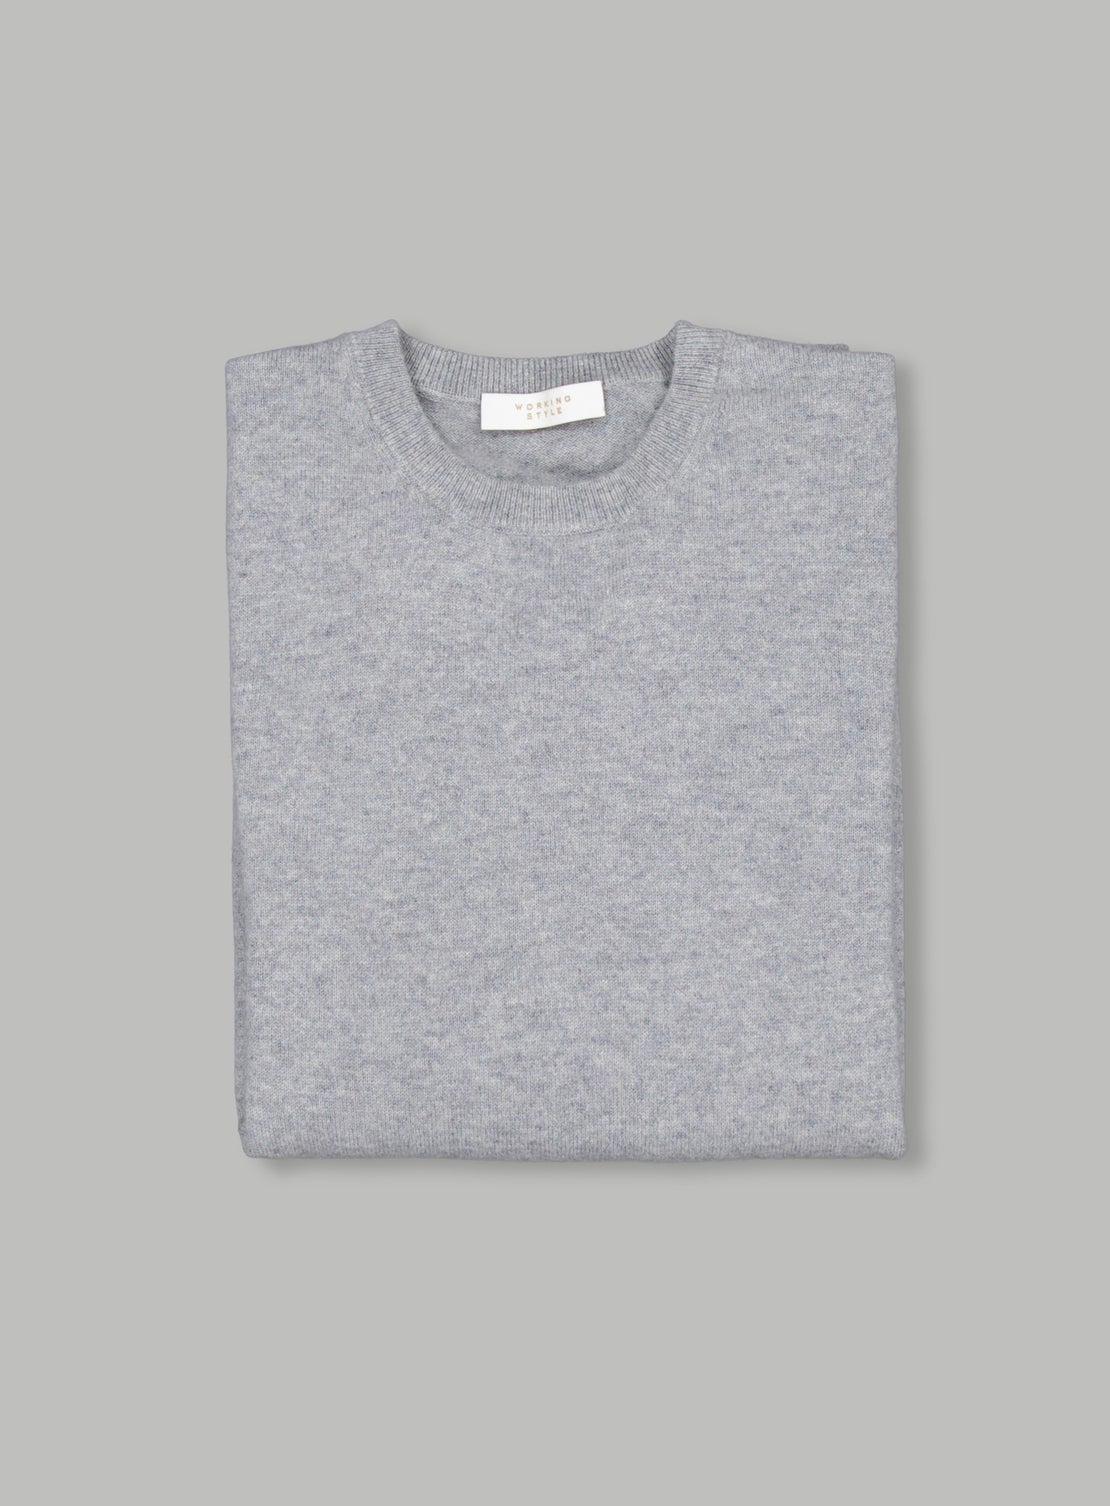 Luxe Dove Grey Cashmere Knit